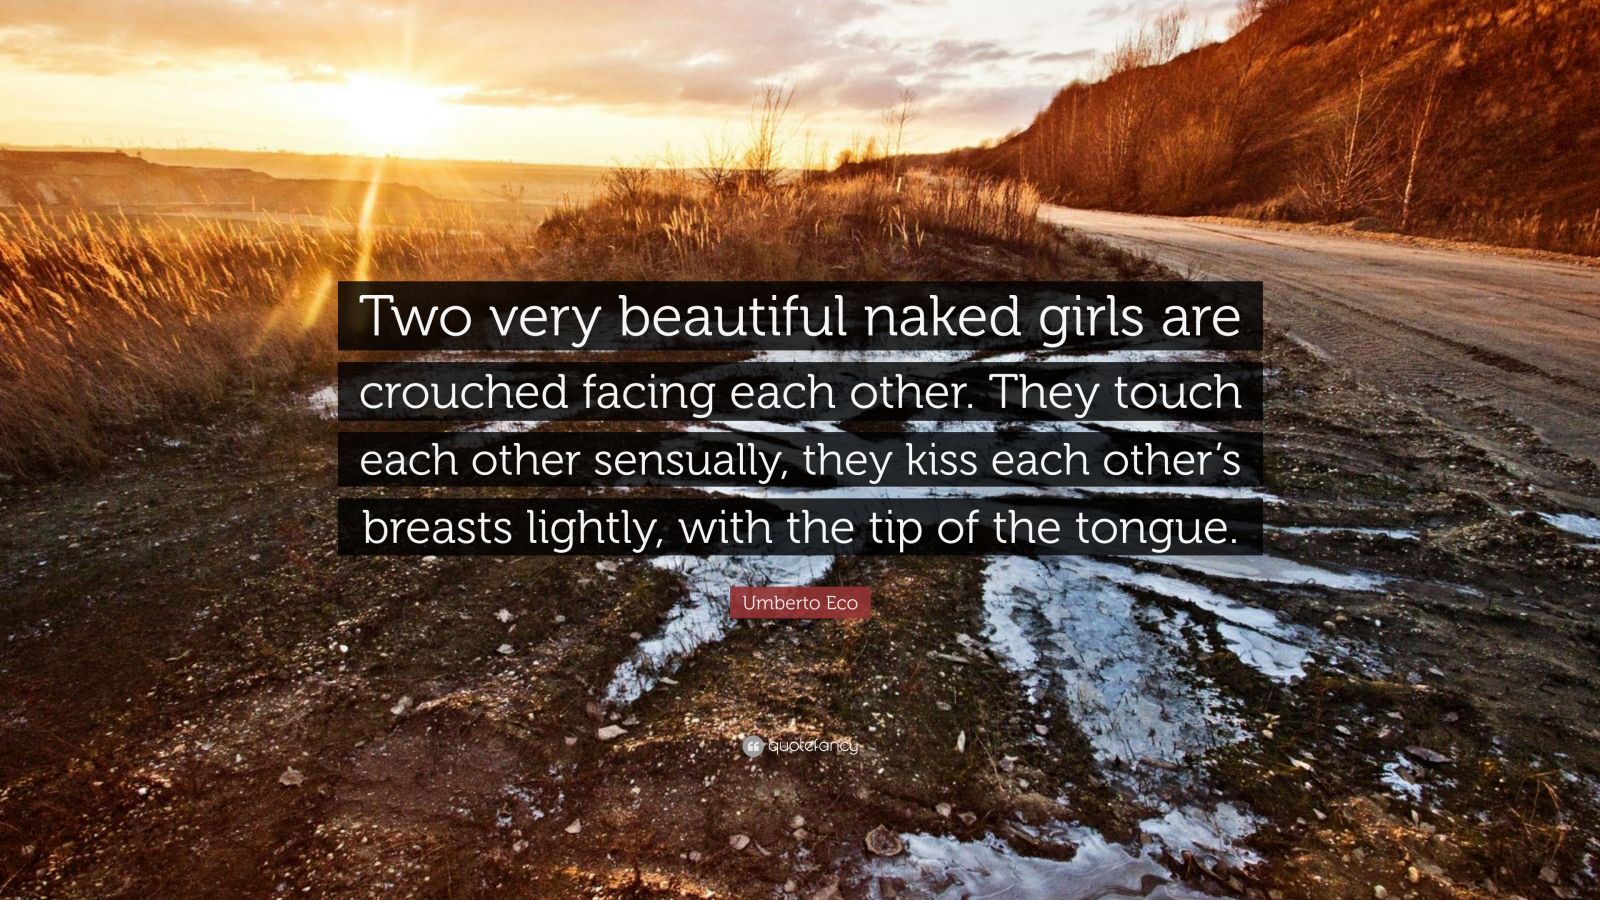 amanda geiger recommends naked beautiful teen girls pic